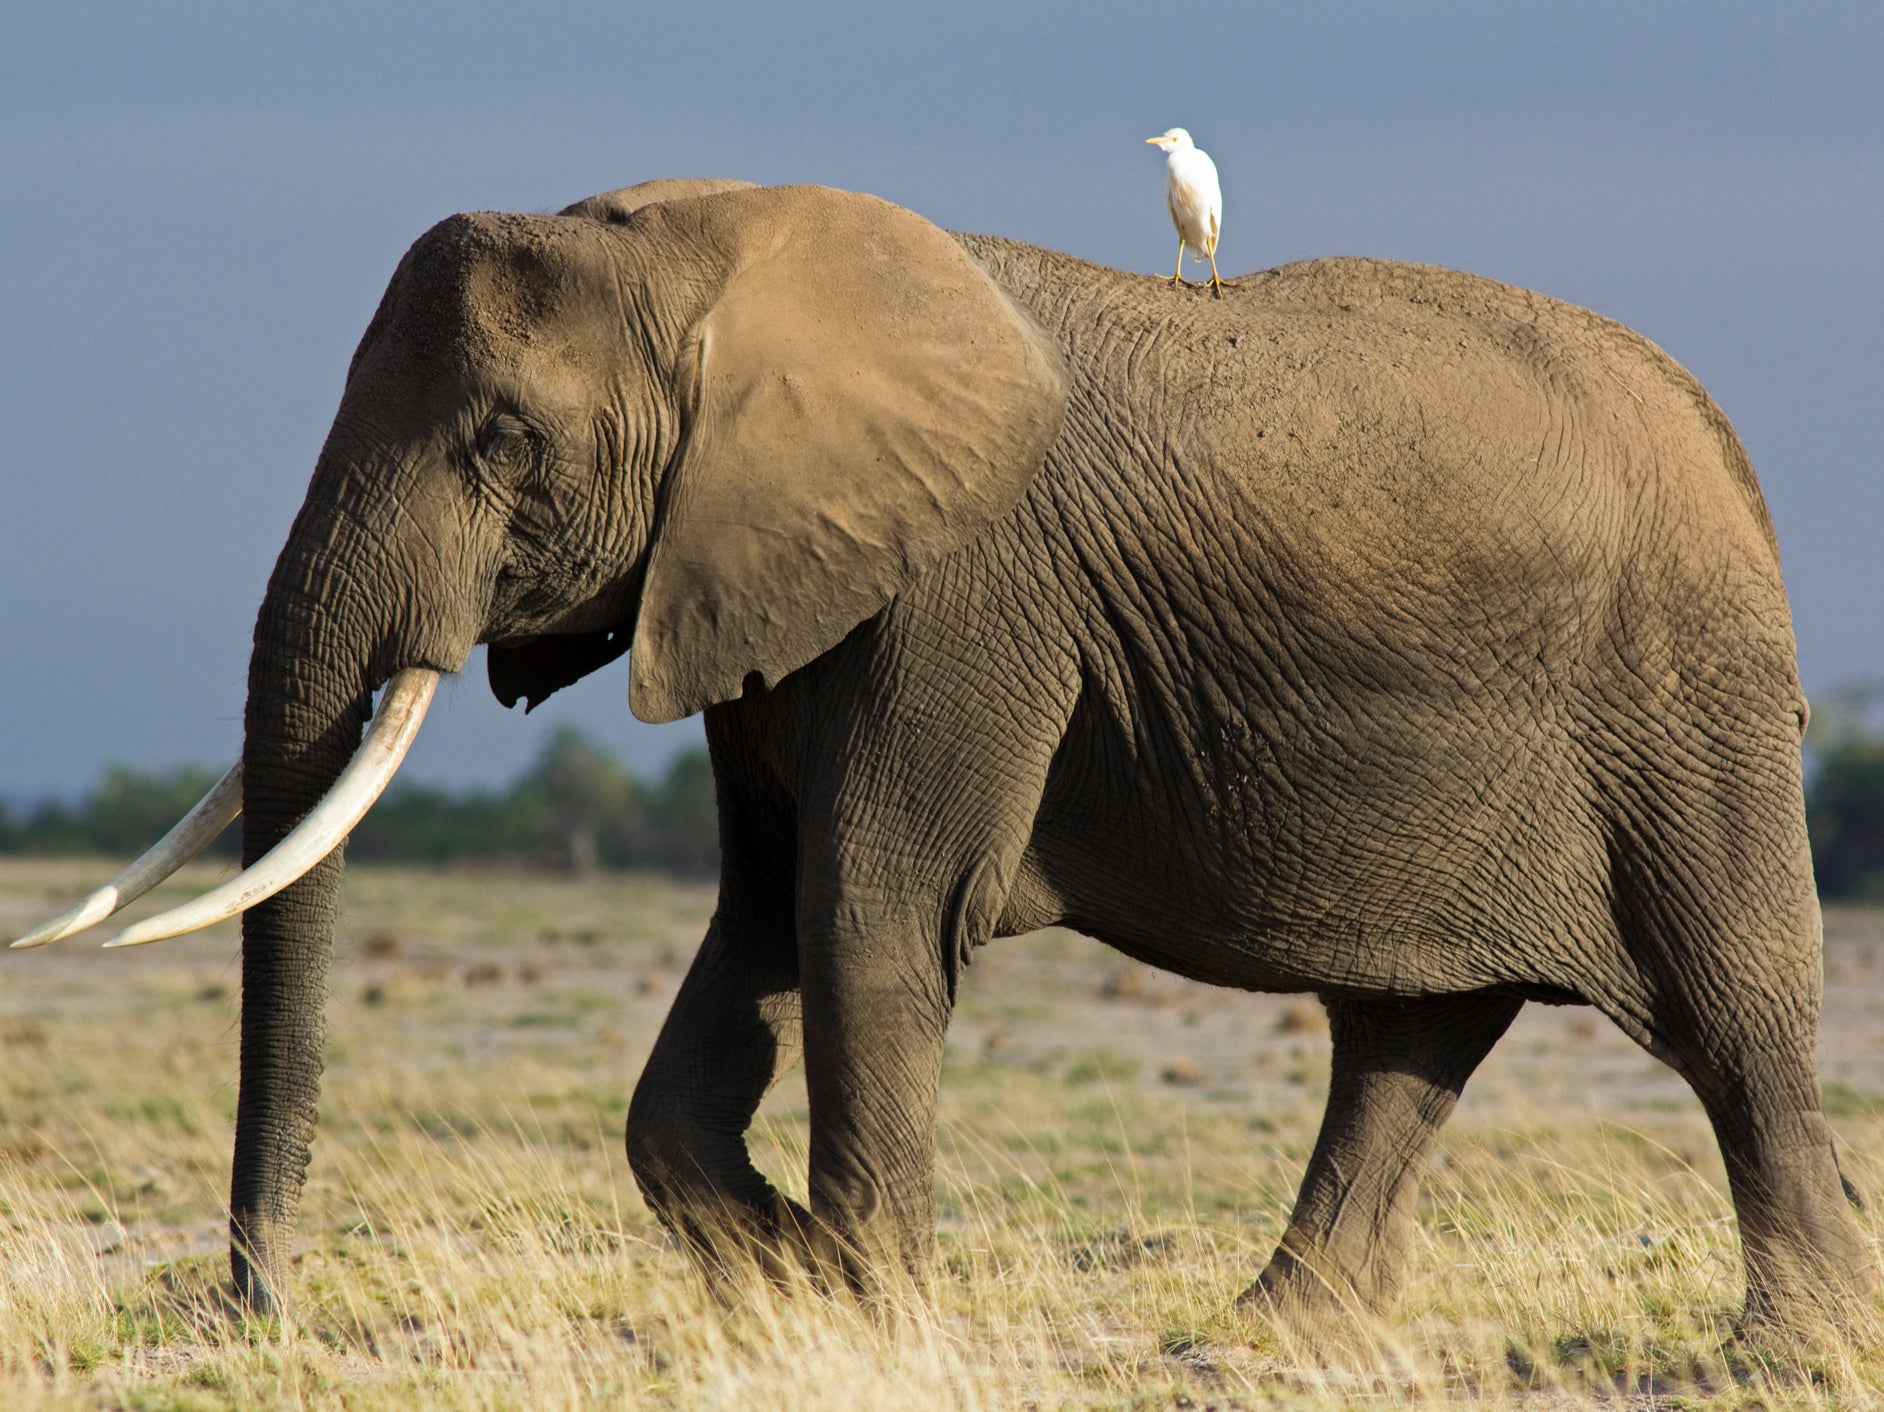 It is thought a total of just 415,000 elephants remain across Africa